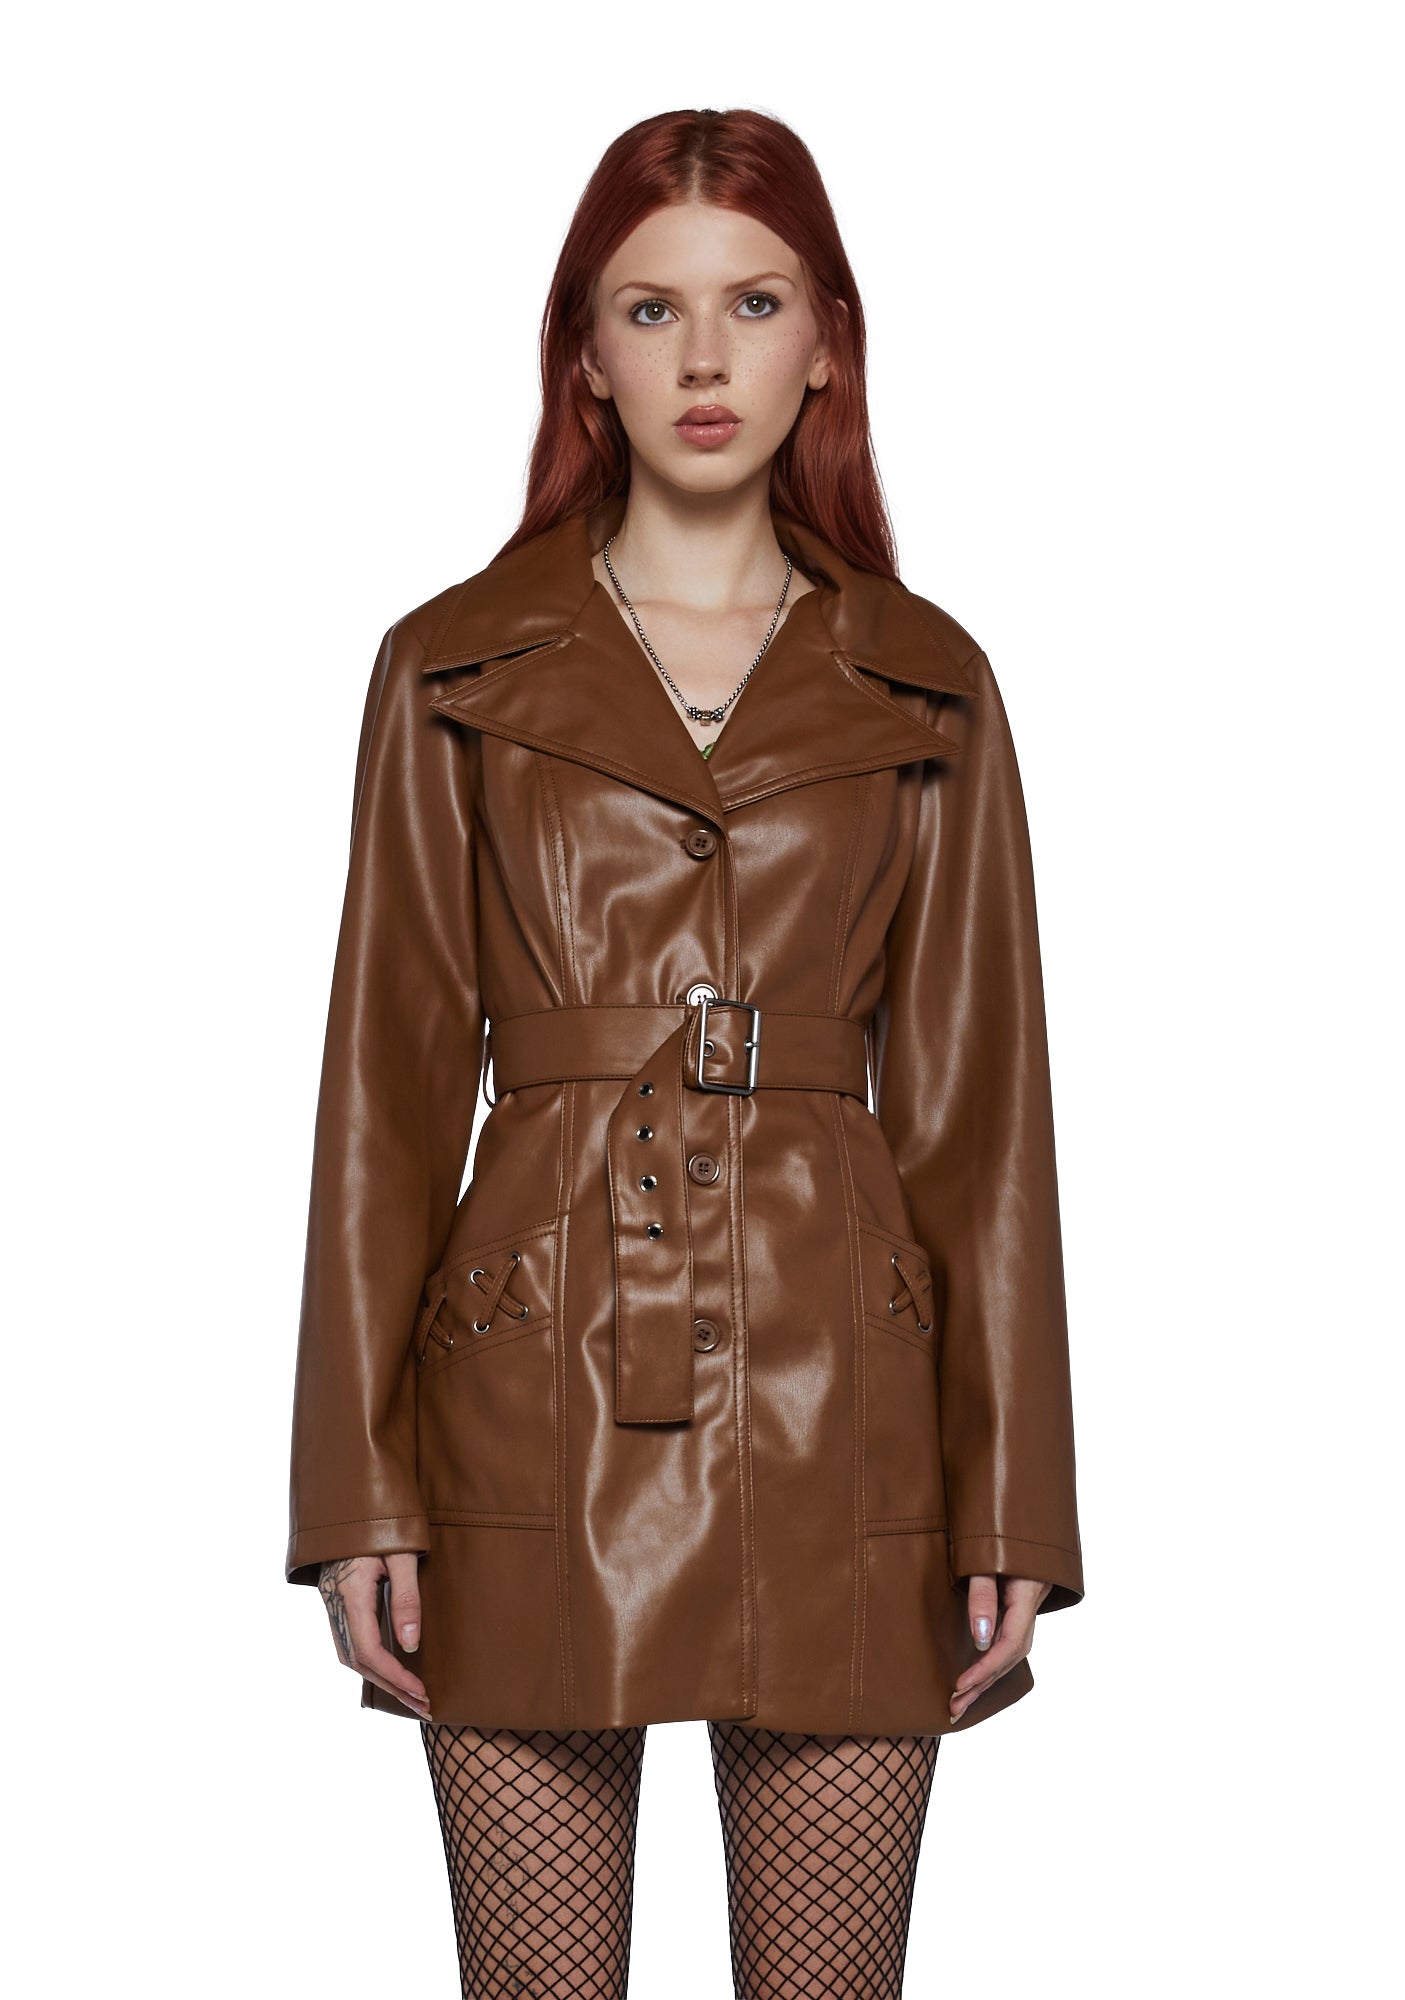 Delia's By Dollskill Vegan Leather Trench Coat - Brown